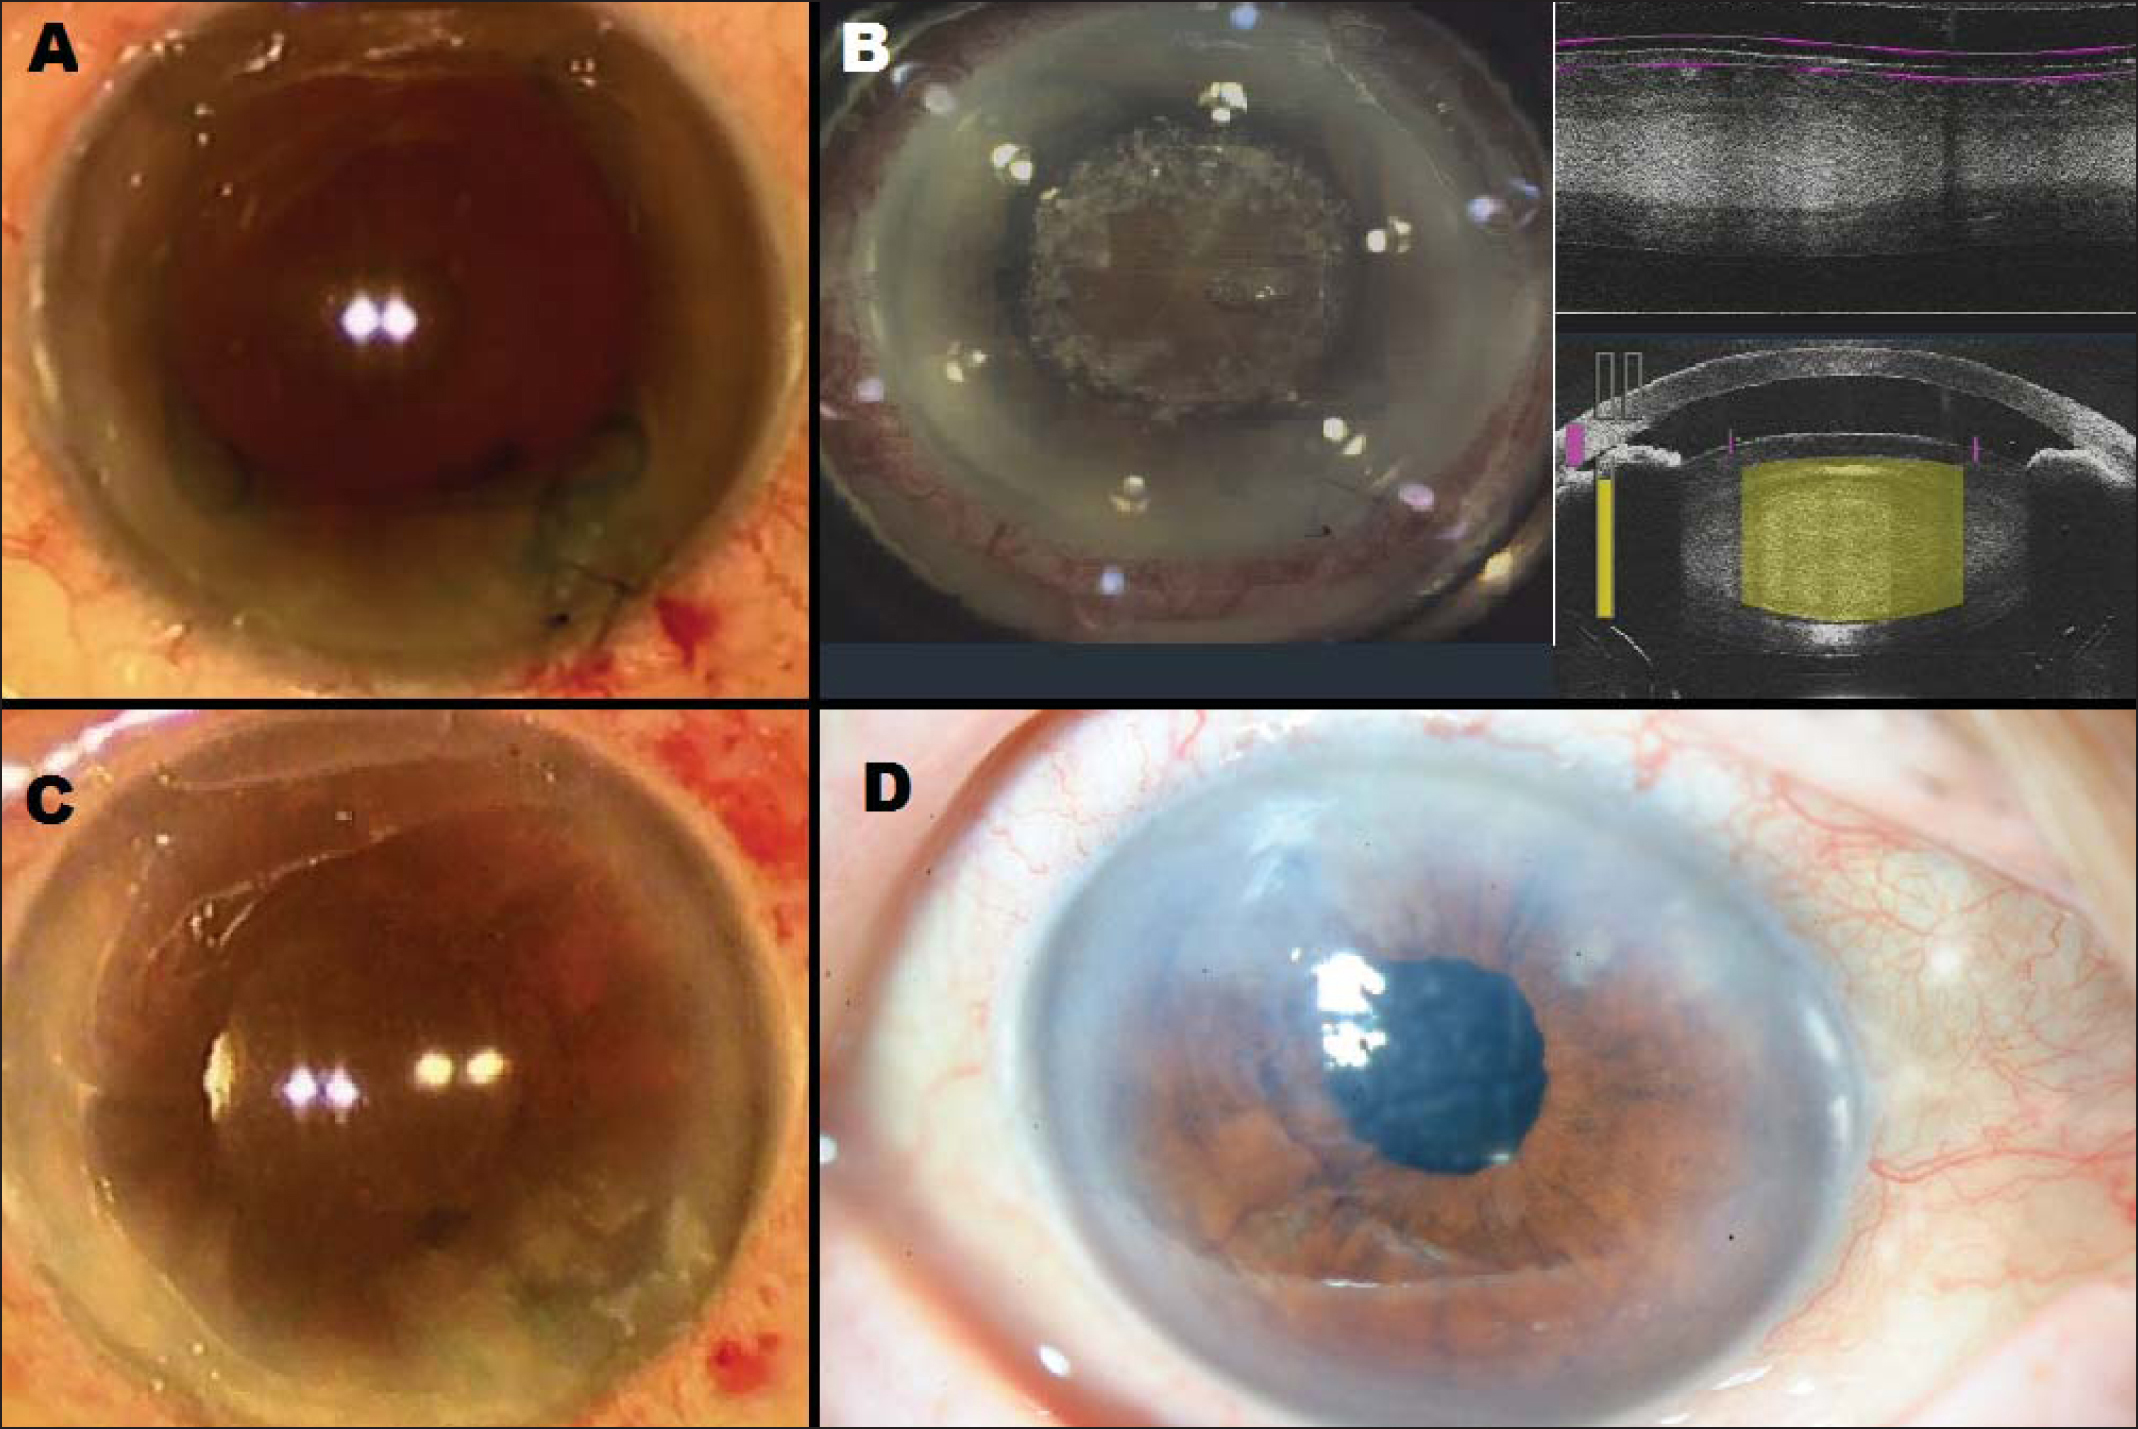 Femtosecond LaserAssisted Cataract Surgery in Management